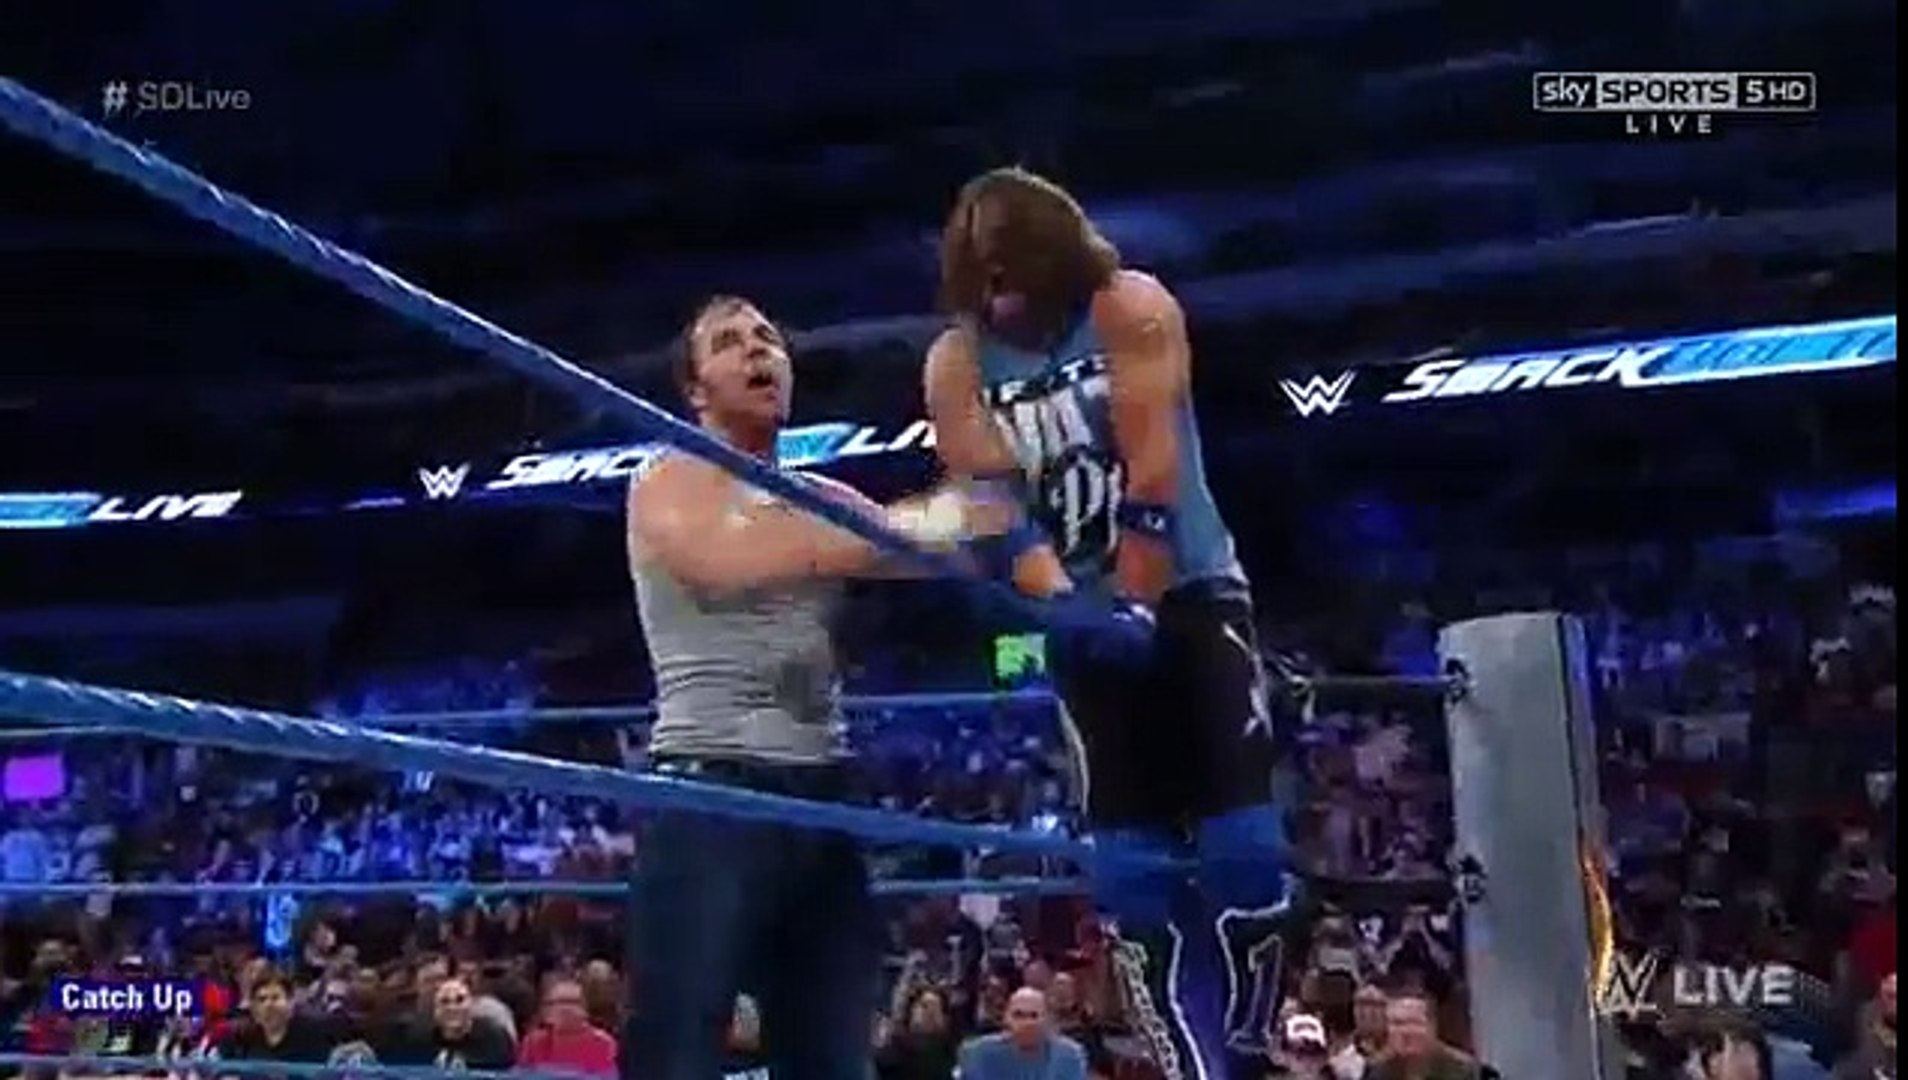 WWE funny moments - Dean ambrose vs Aj styles - WWE SmackDown 30 August  2016 - video Dailymotion